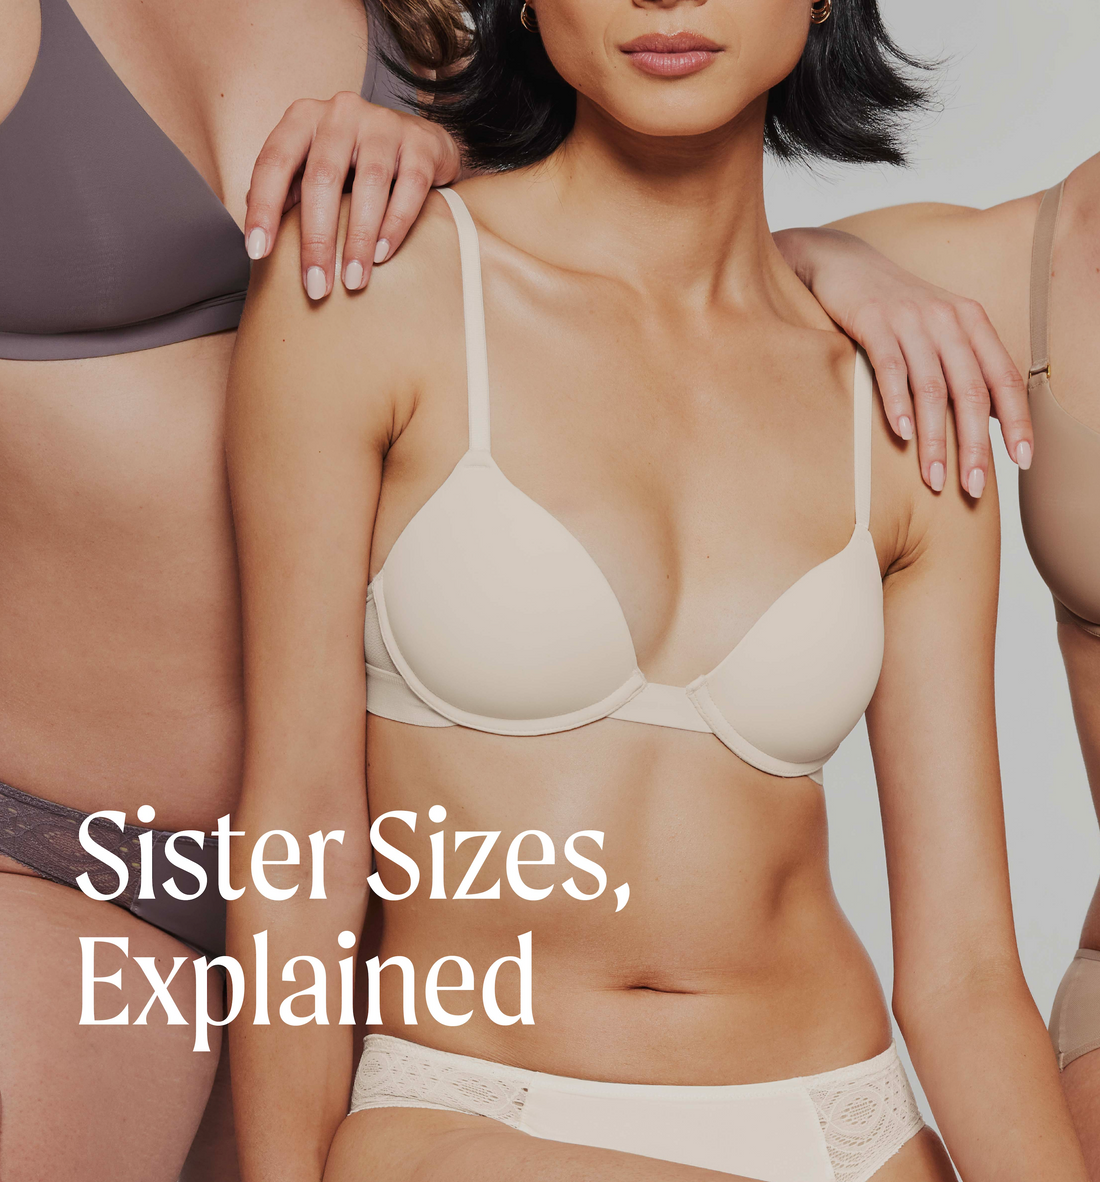 Do you know your sister sizes?